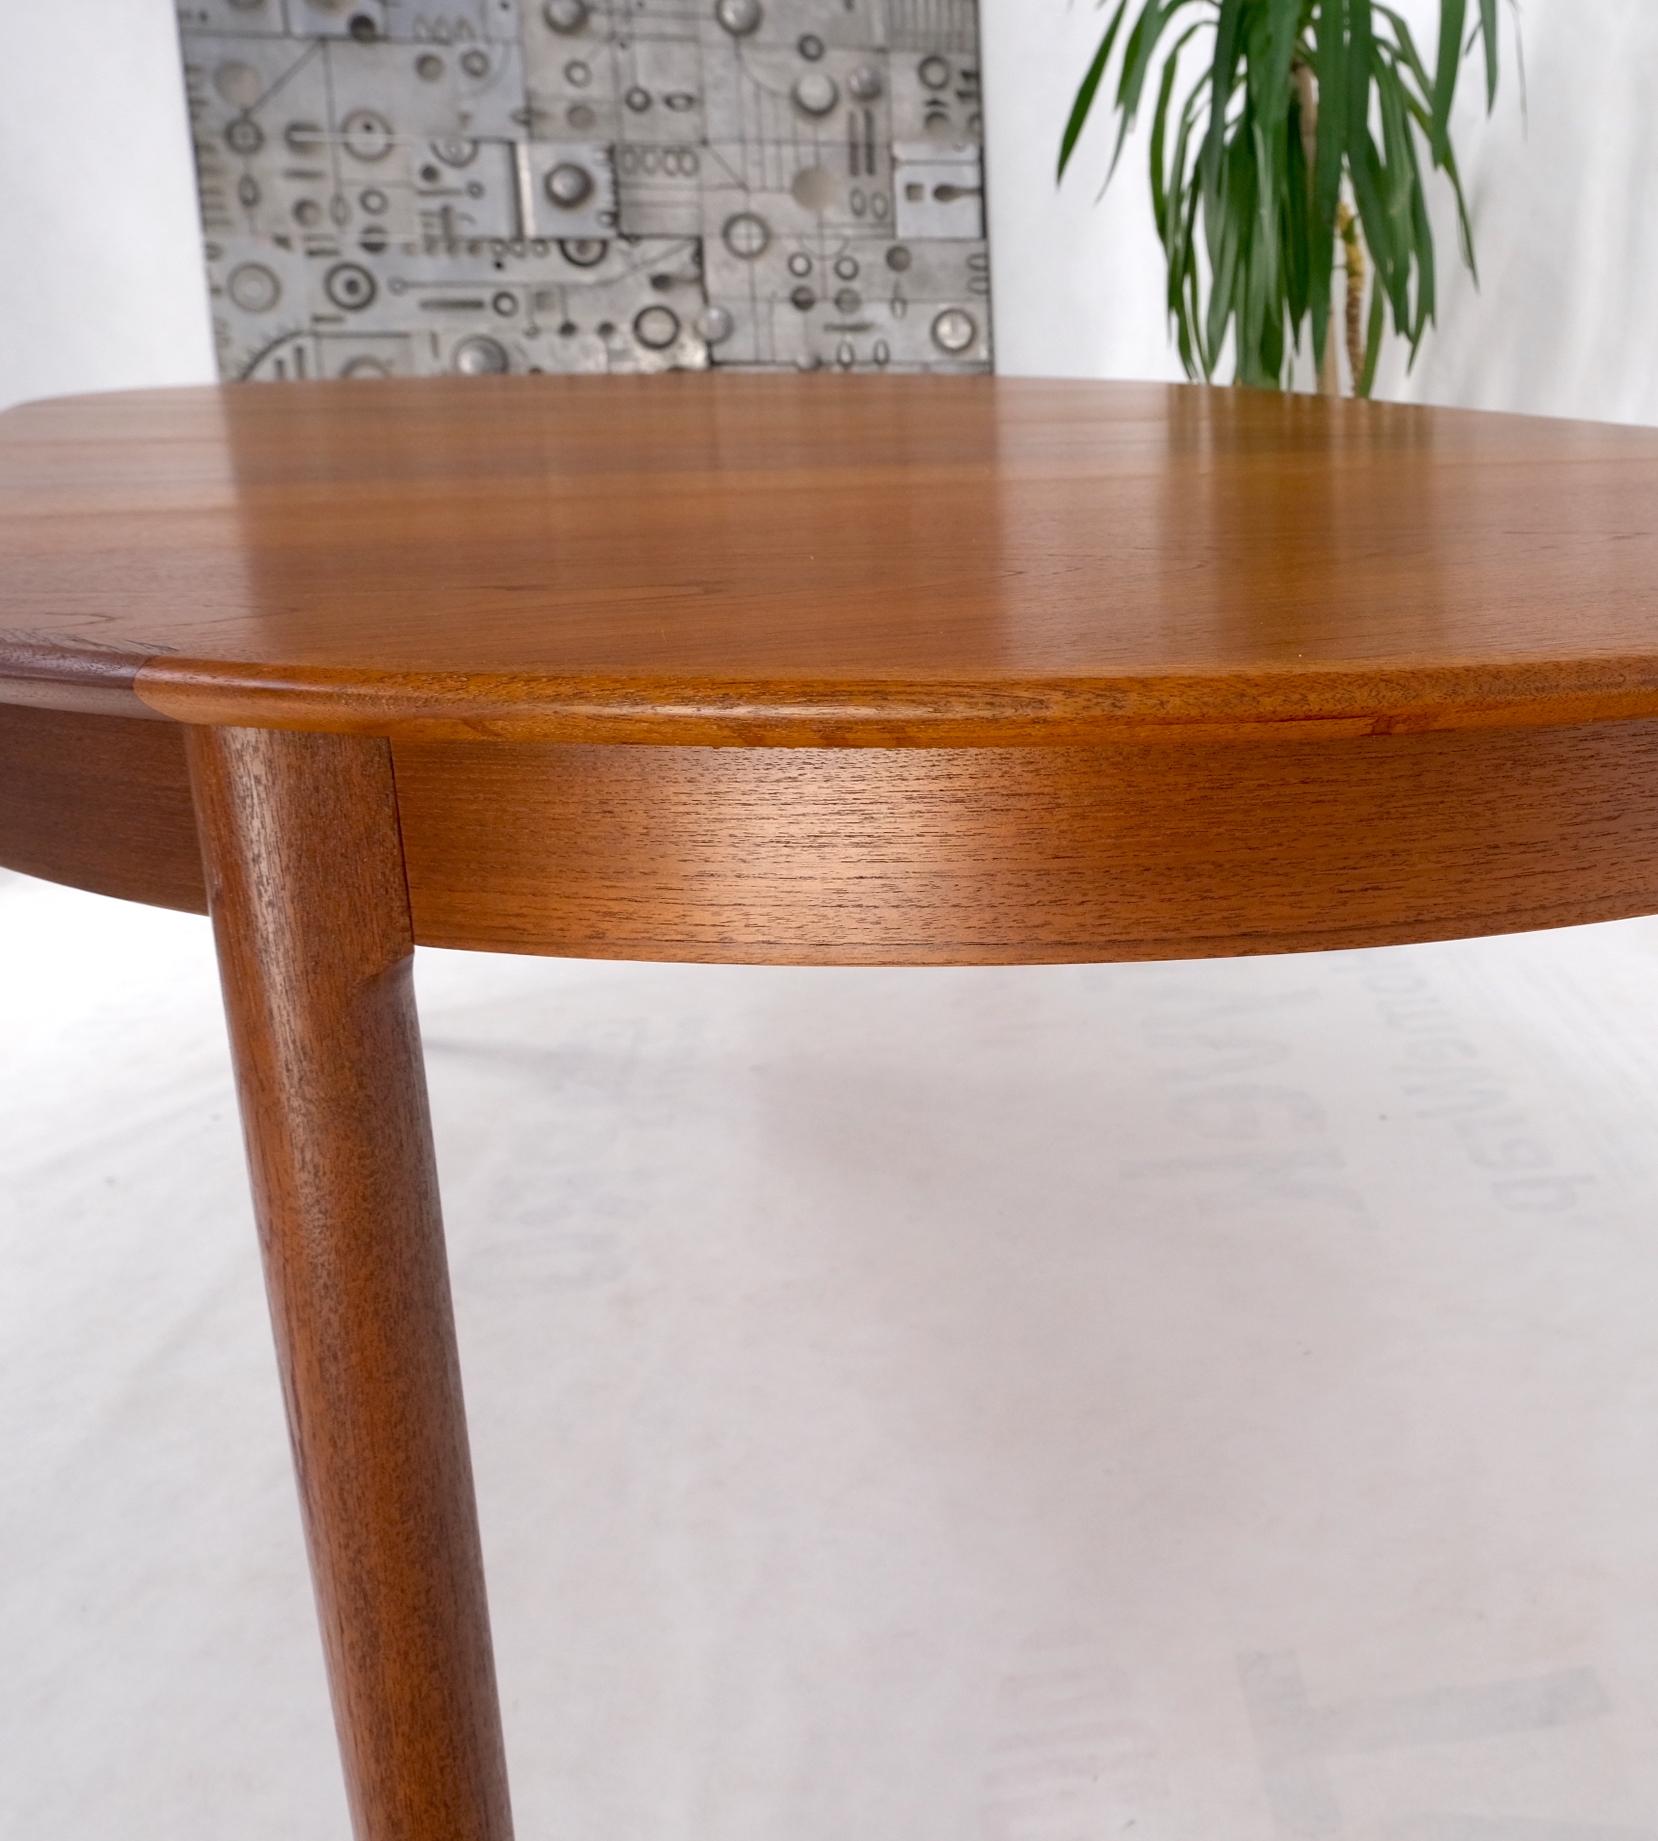 20th Century Danish Teak Mid-Century Modern Round Dining Table w/ Two Extension Boards Leafs For Sale